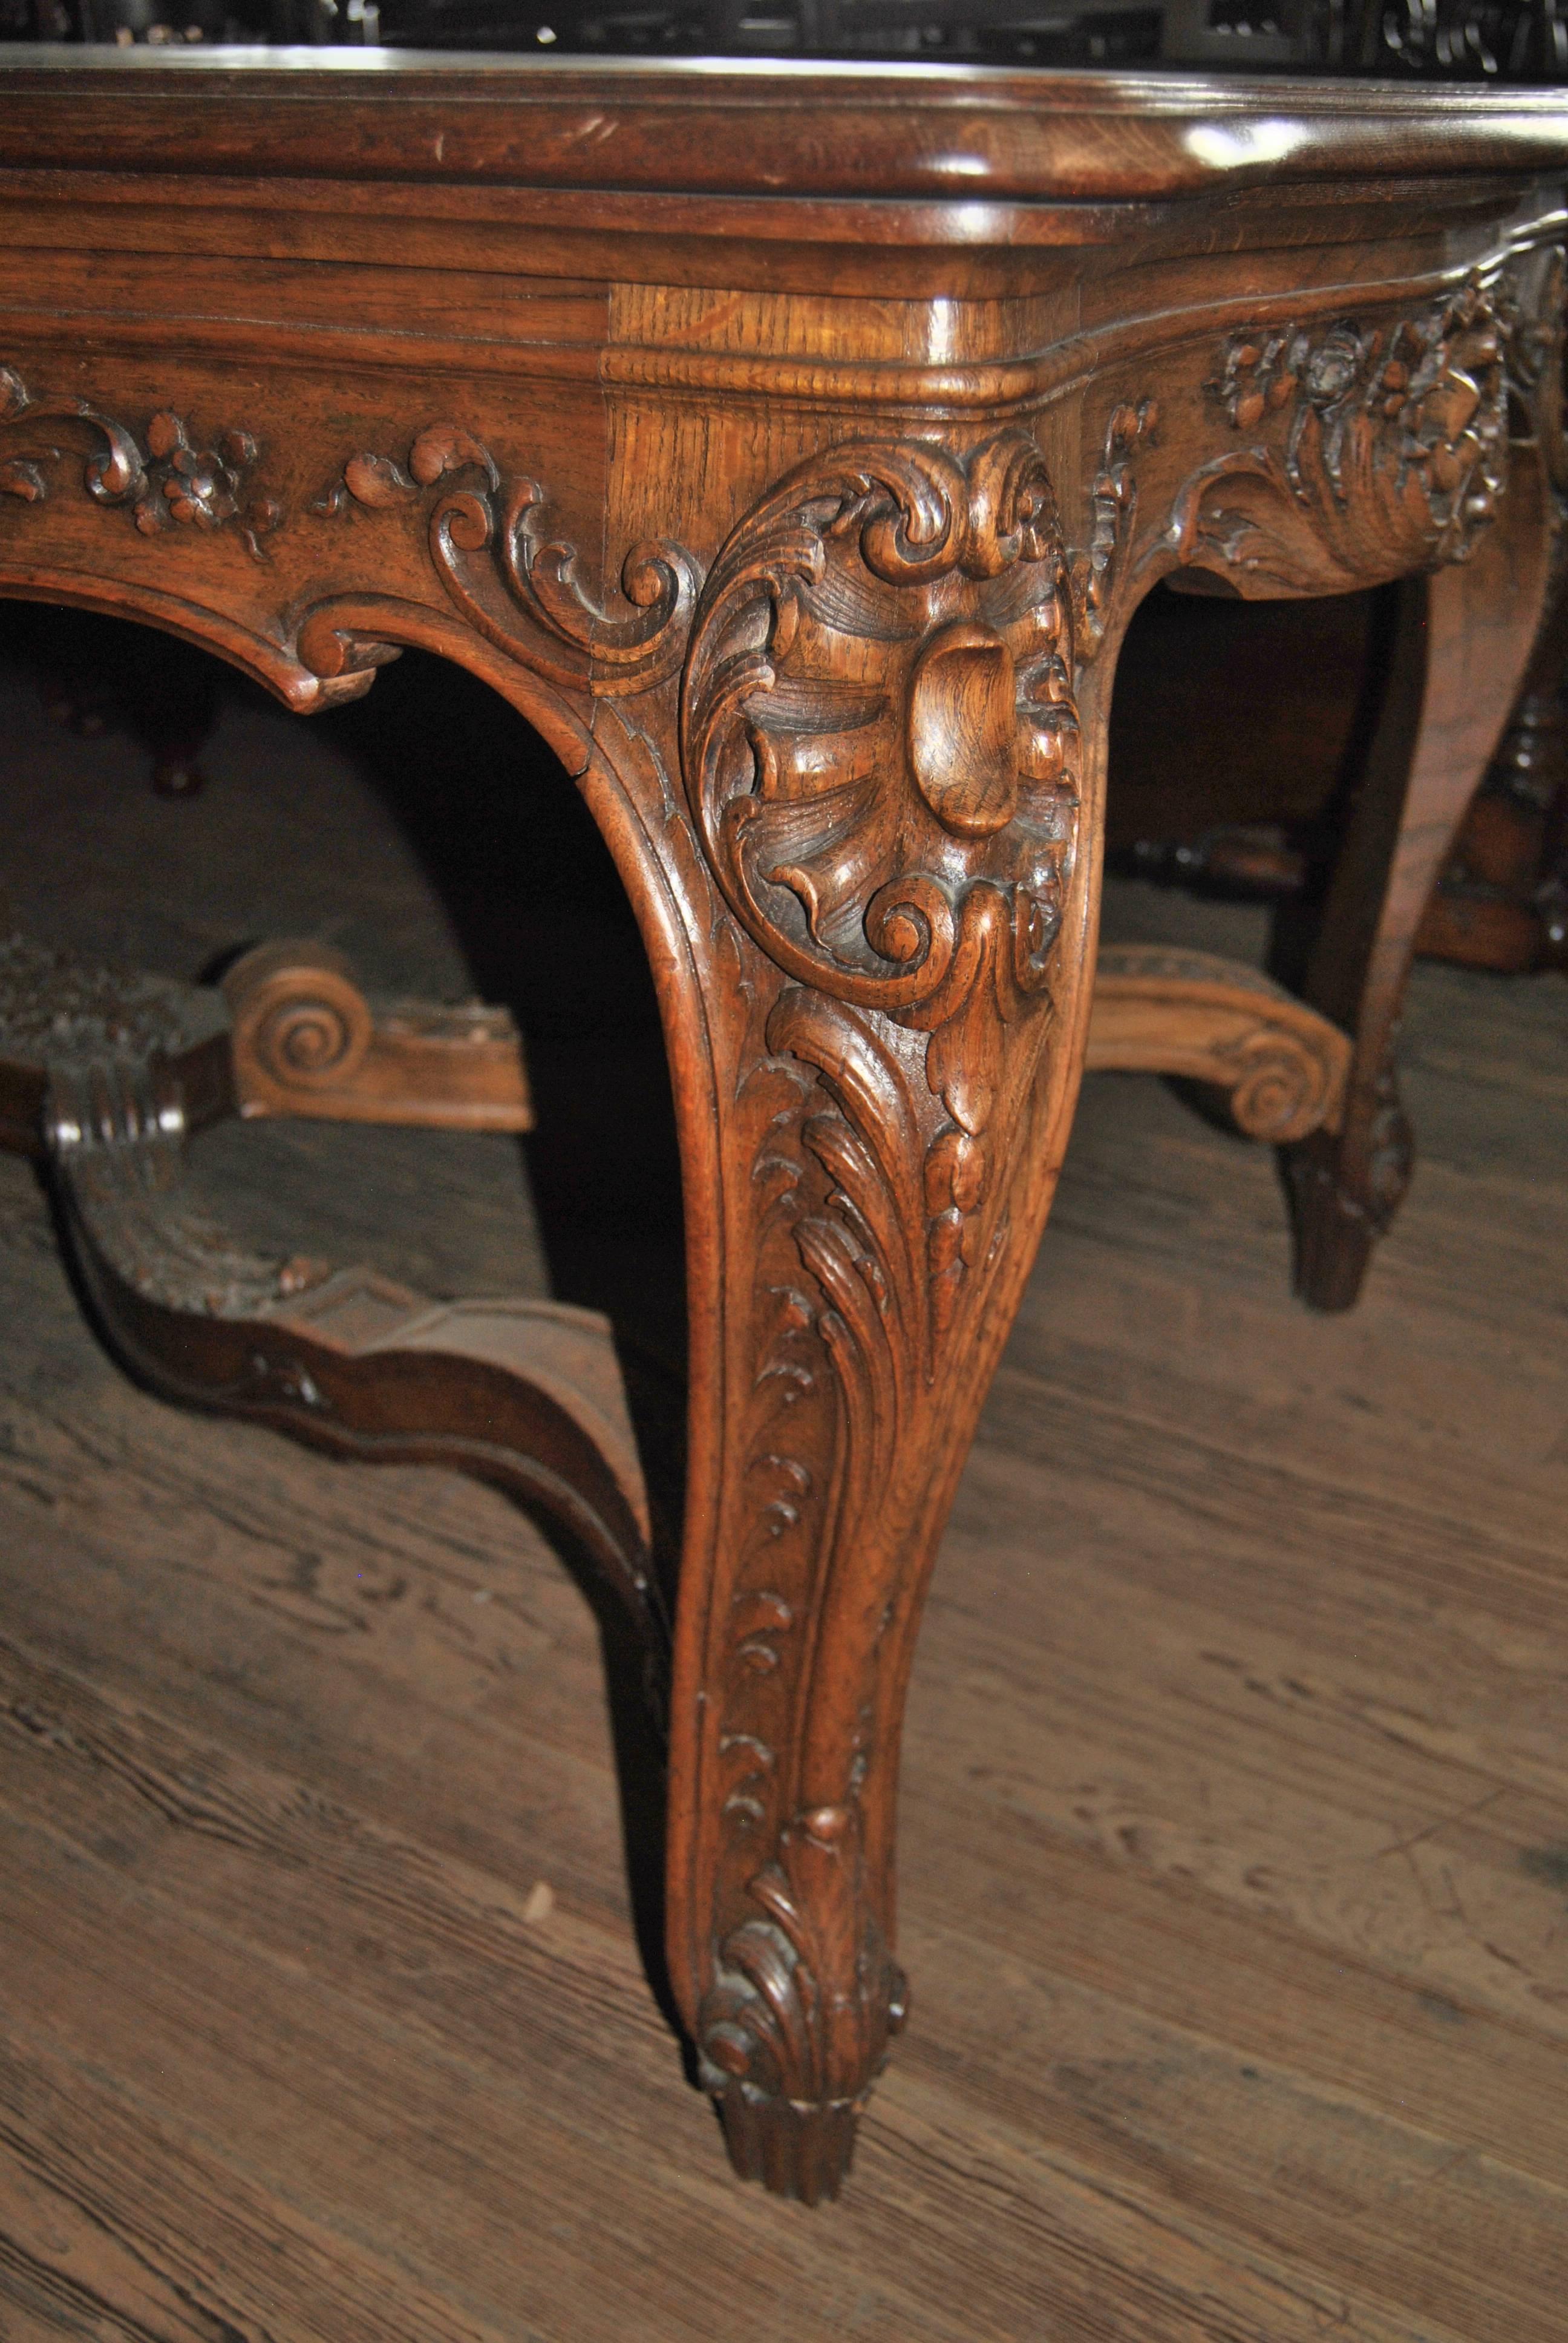 This is a fabulous quality, very highly carved table made in France, circa 1920. The table has extremely Fine quality carvings throughout. The sides and ends of the table are serpentine in shape with a double molded edge. The table has a beautiful